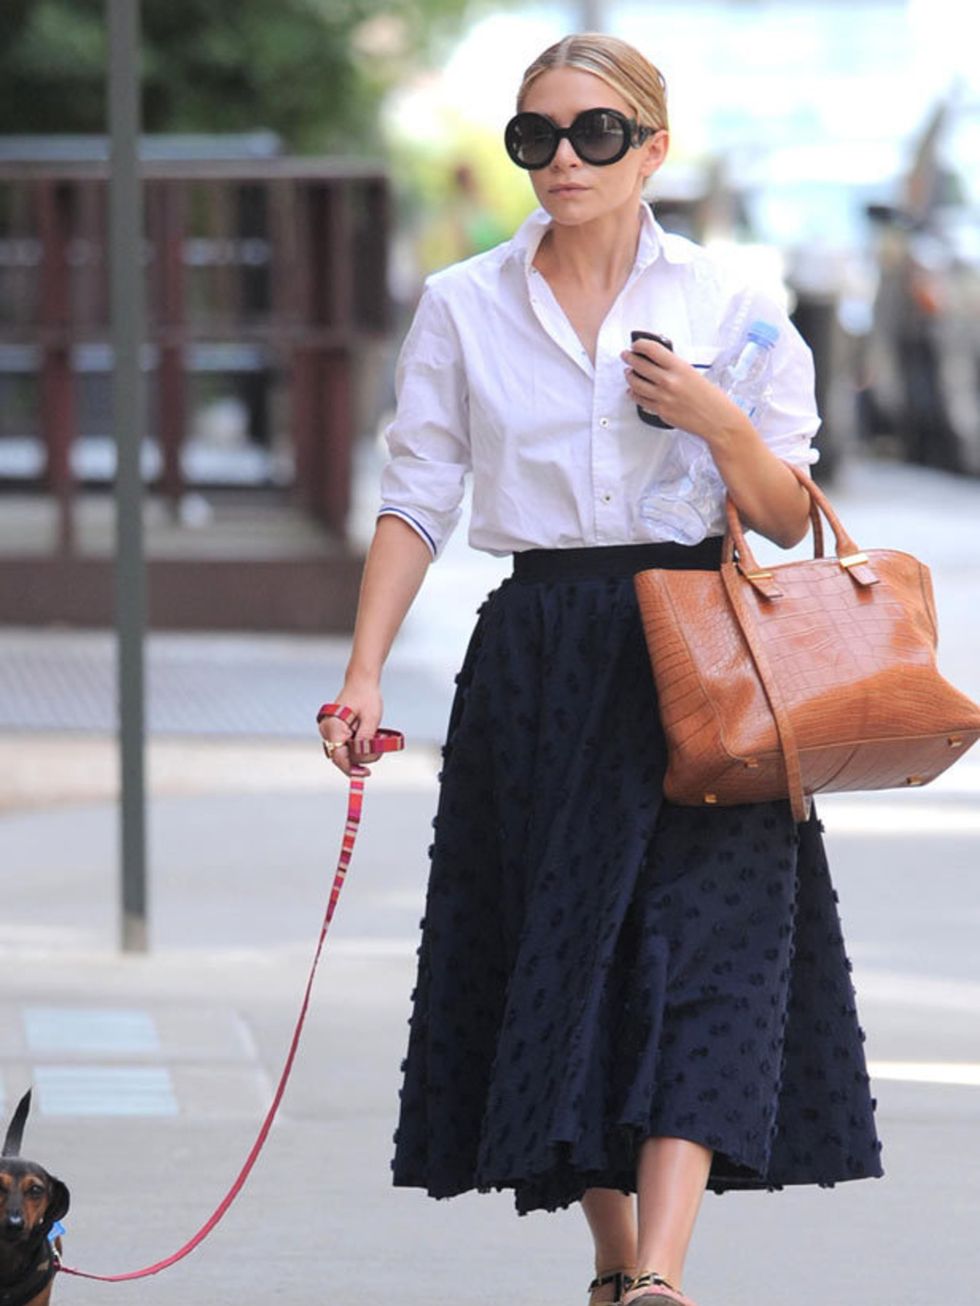 <p><a href="http://www.elleuk.com/starstyle/style-files/(section)/ashley-olsen">Ashley Olsen</a> channelling an understated ladylike look with a white shirt, statement skirt and <a href="http://www.elleuk.com/catwalk/collections/prada/spring-summer-2011/r